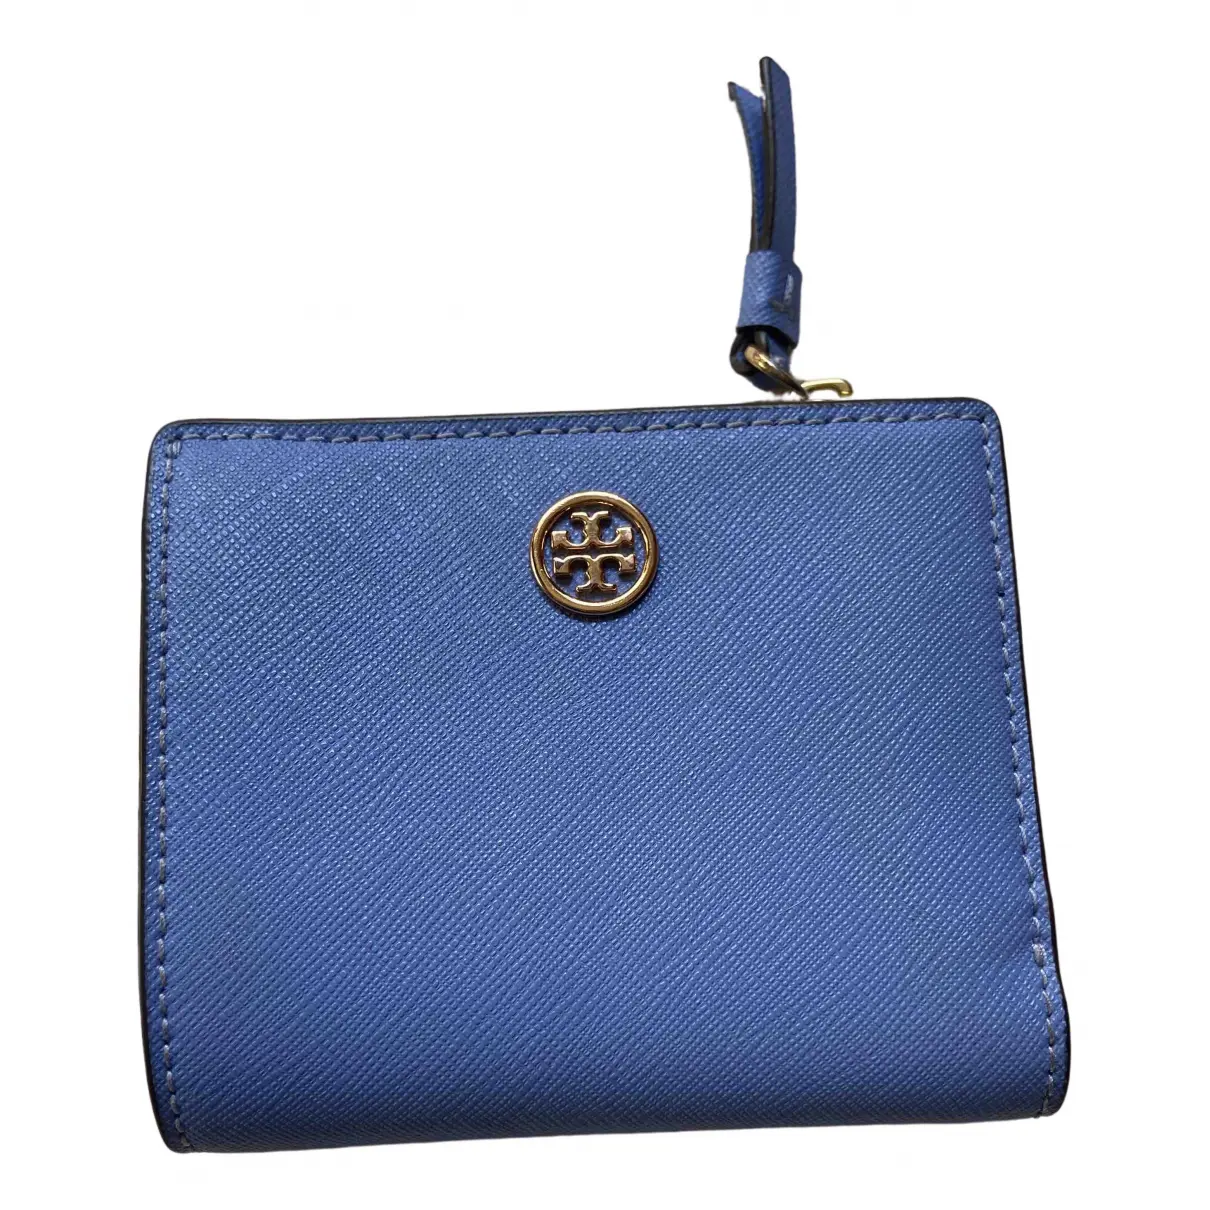 Leather wallet Tory Burch